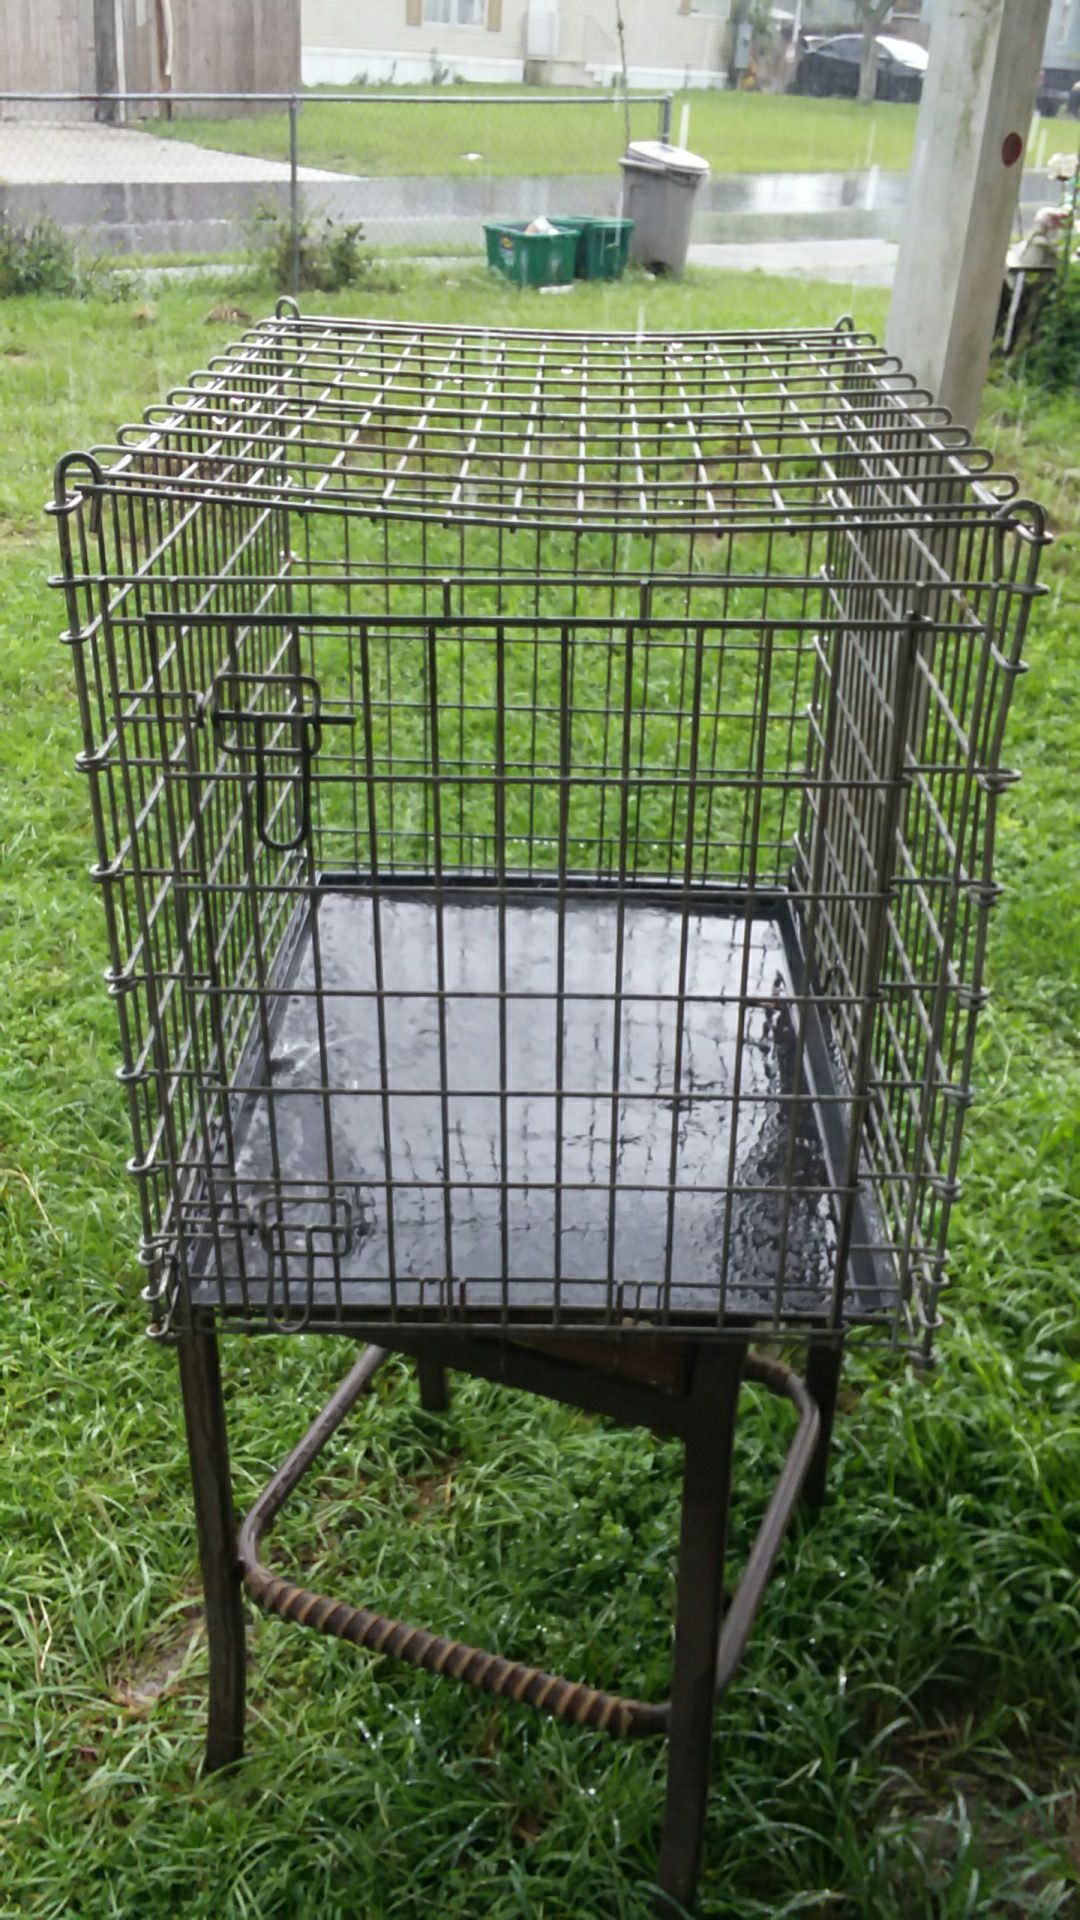 Cage for animal or large bird